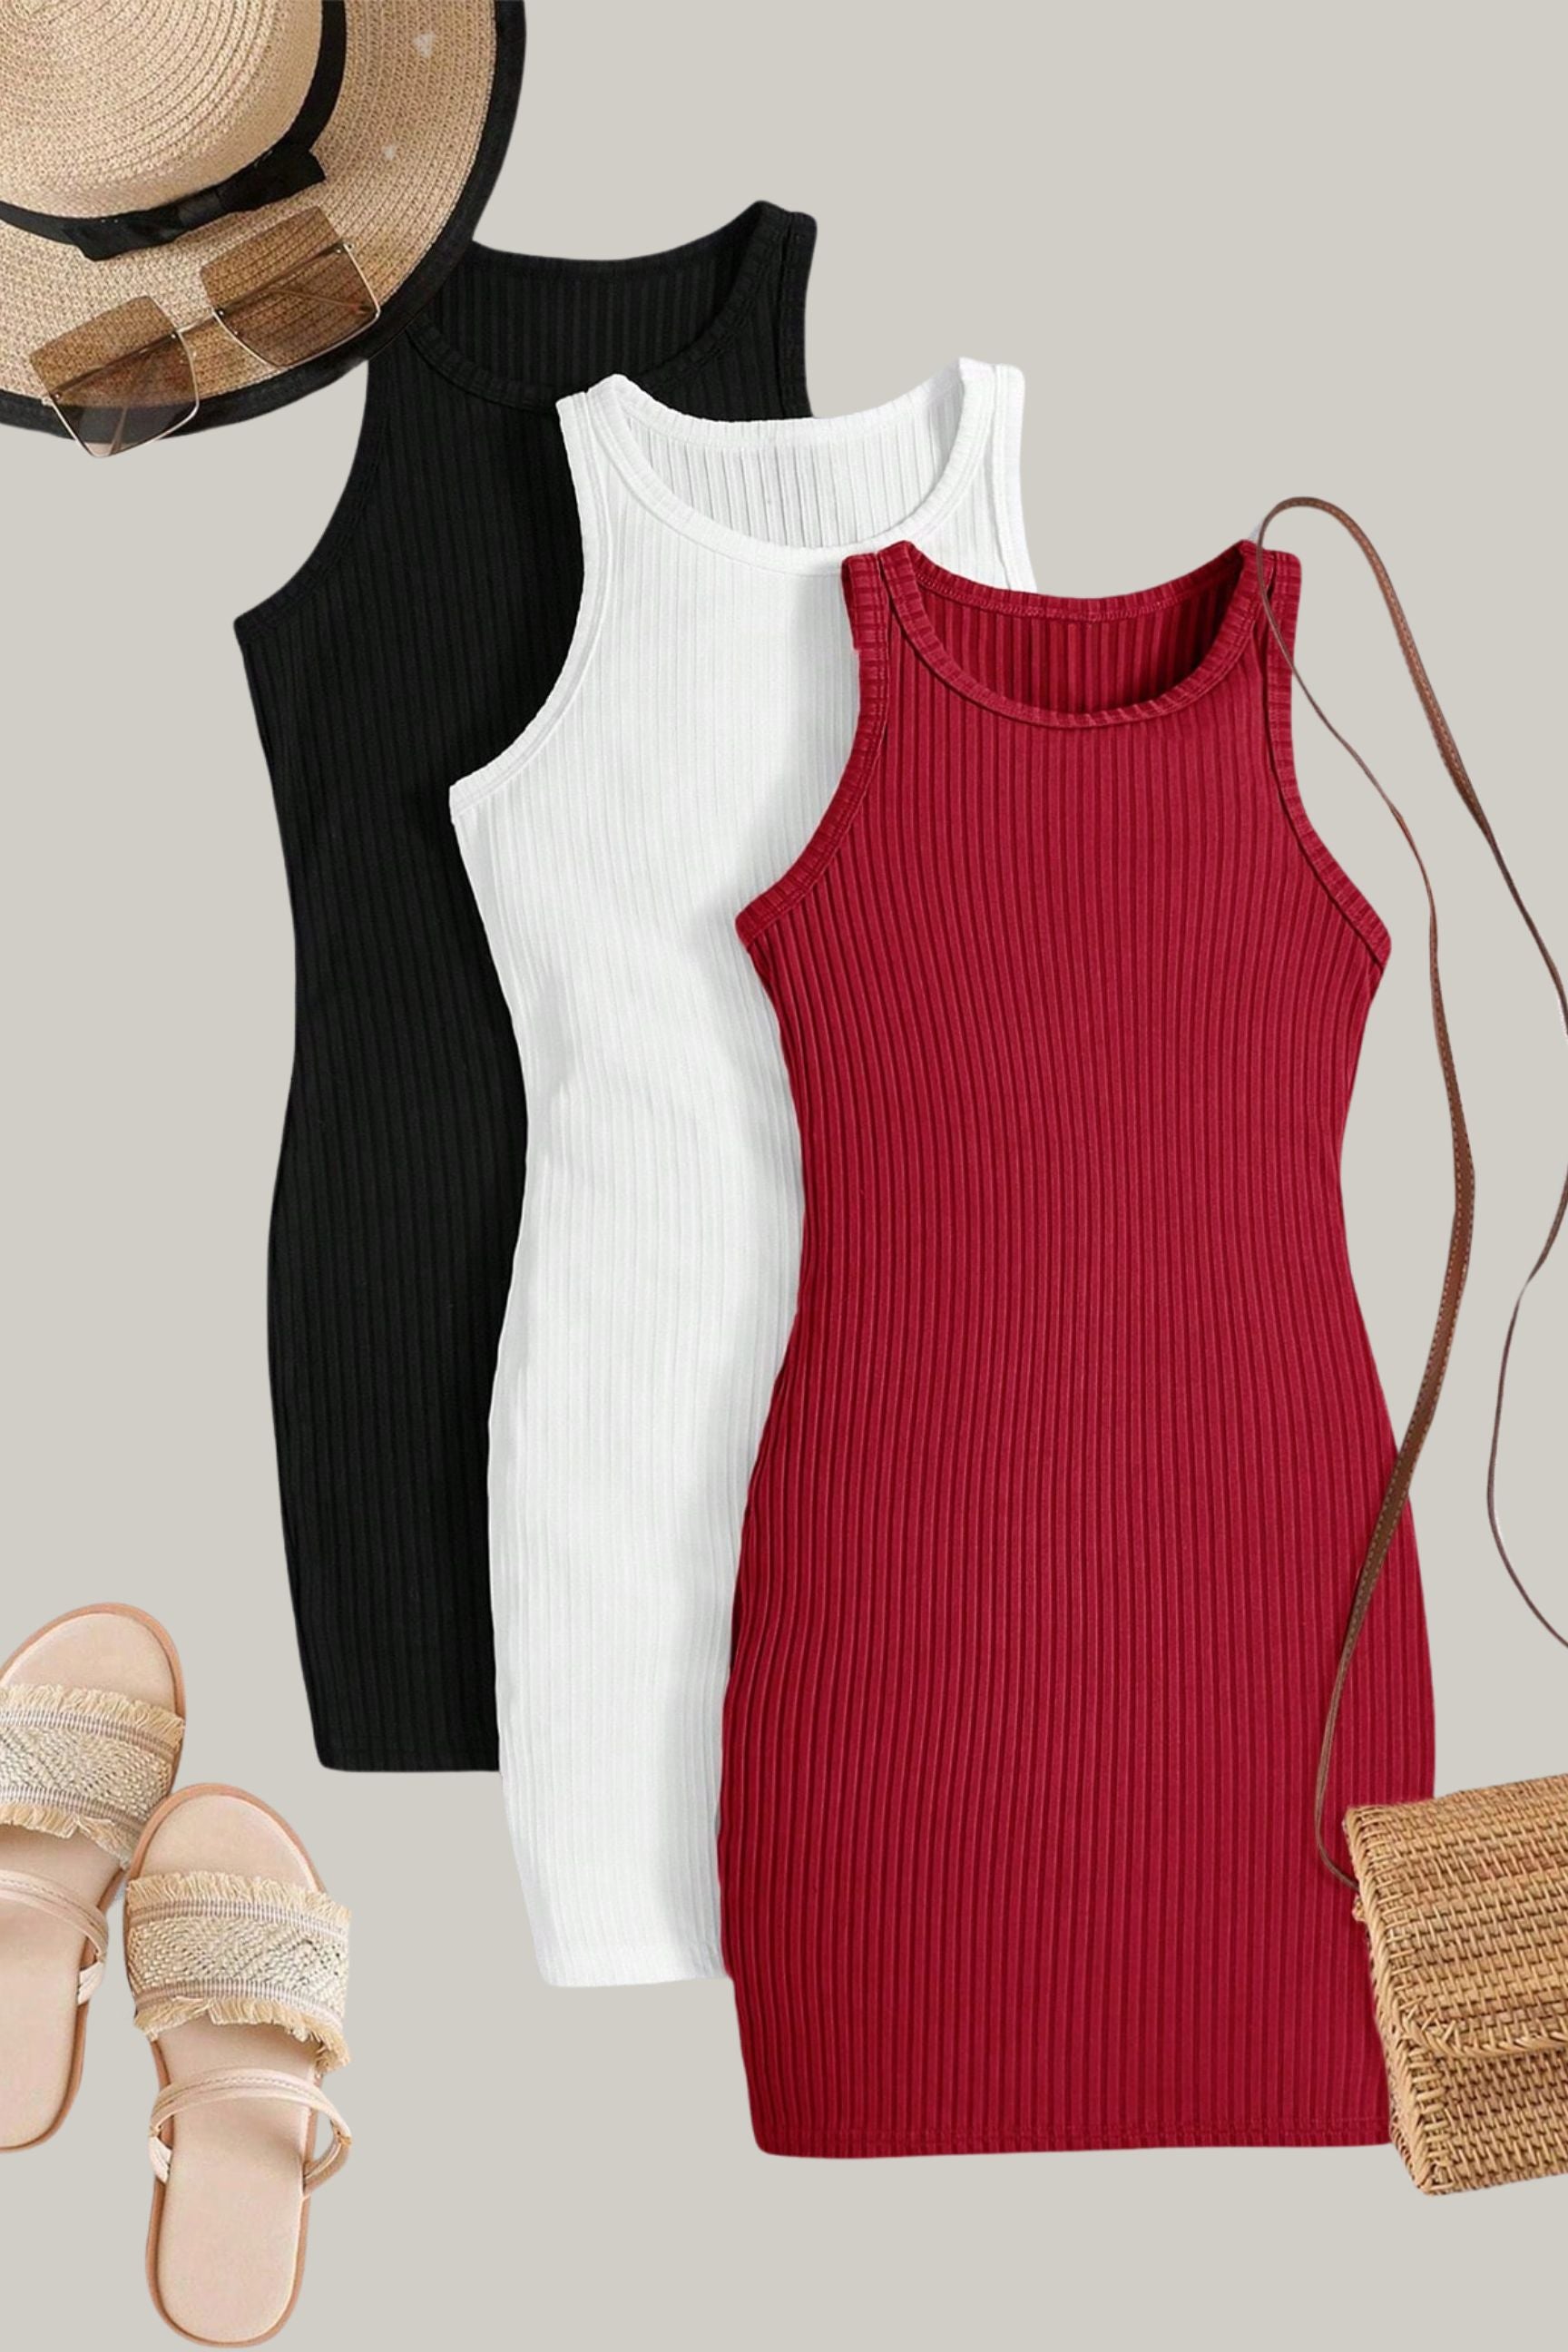 3pcs/Set Knitted Bodycon Casual Dress